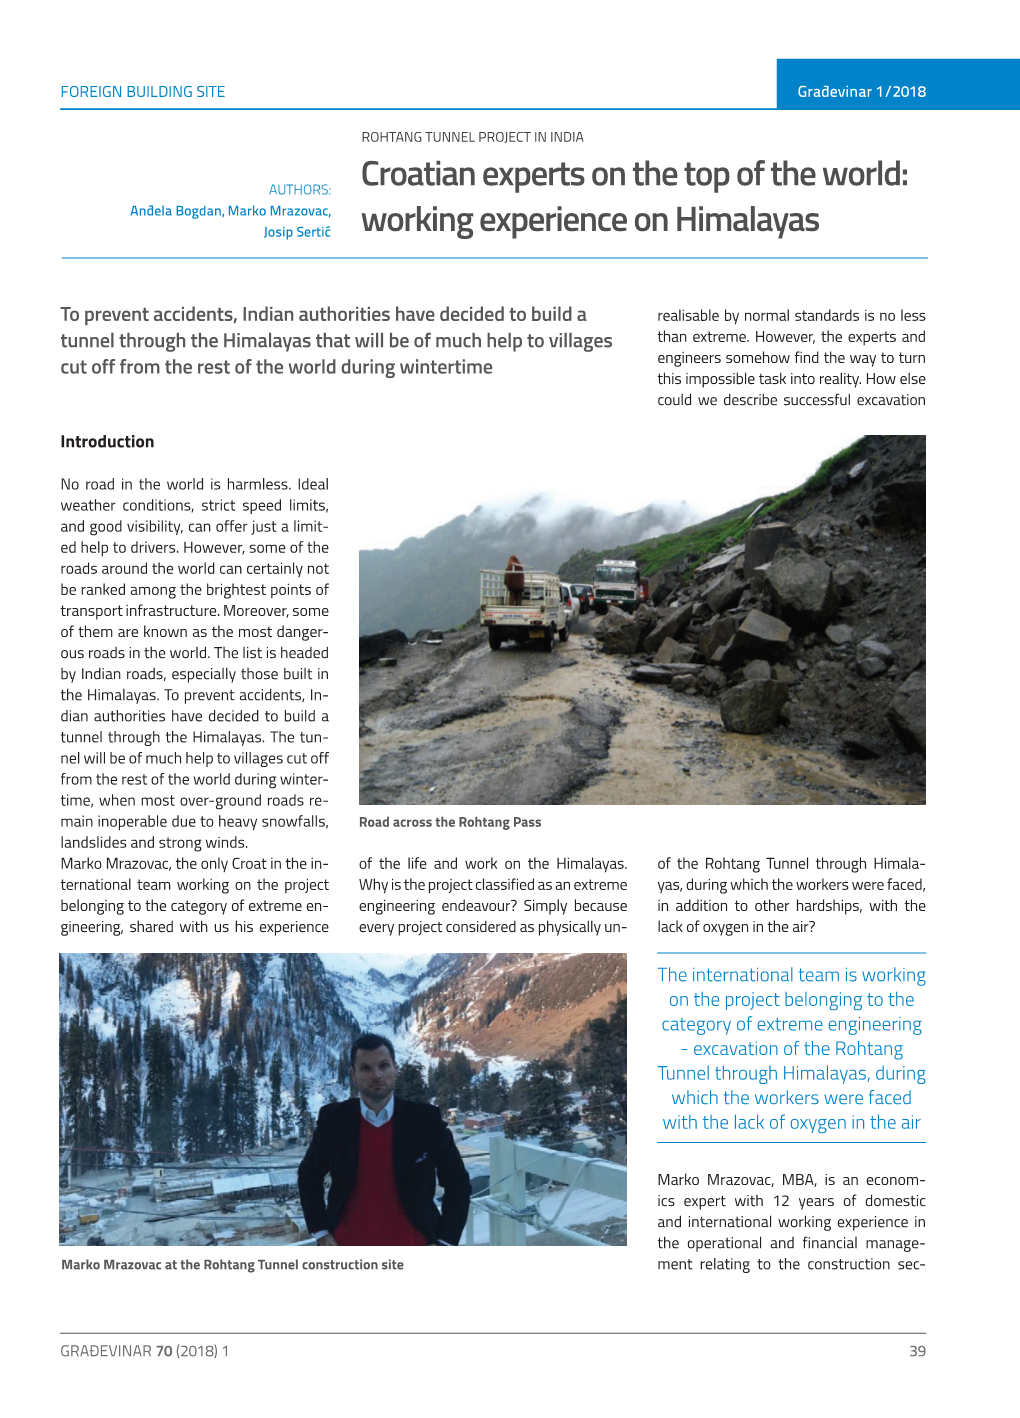 Working Experience on Himalayas